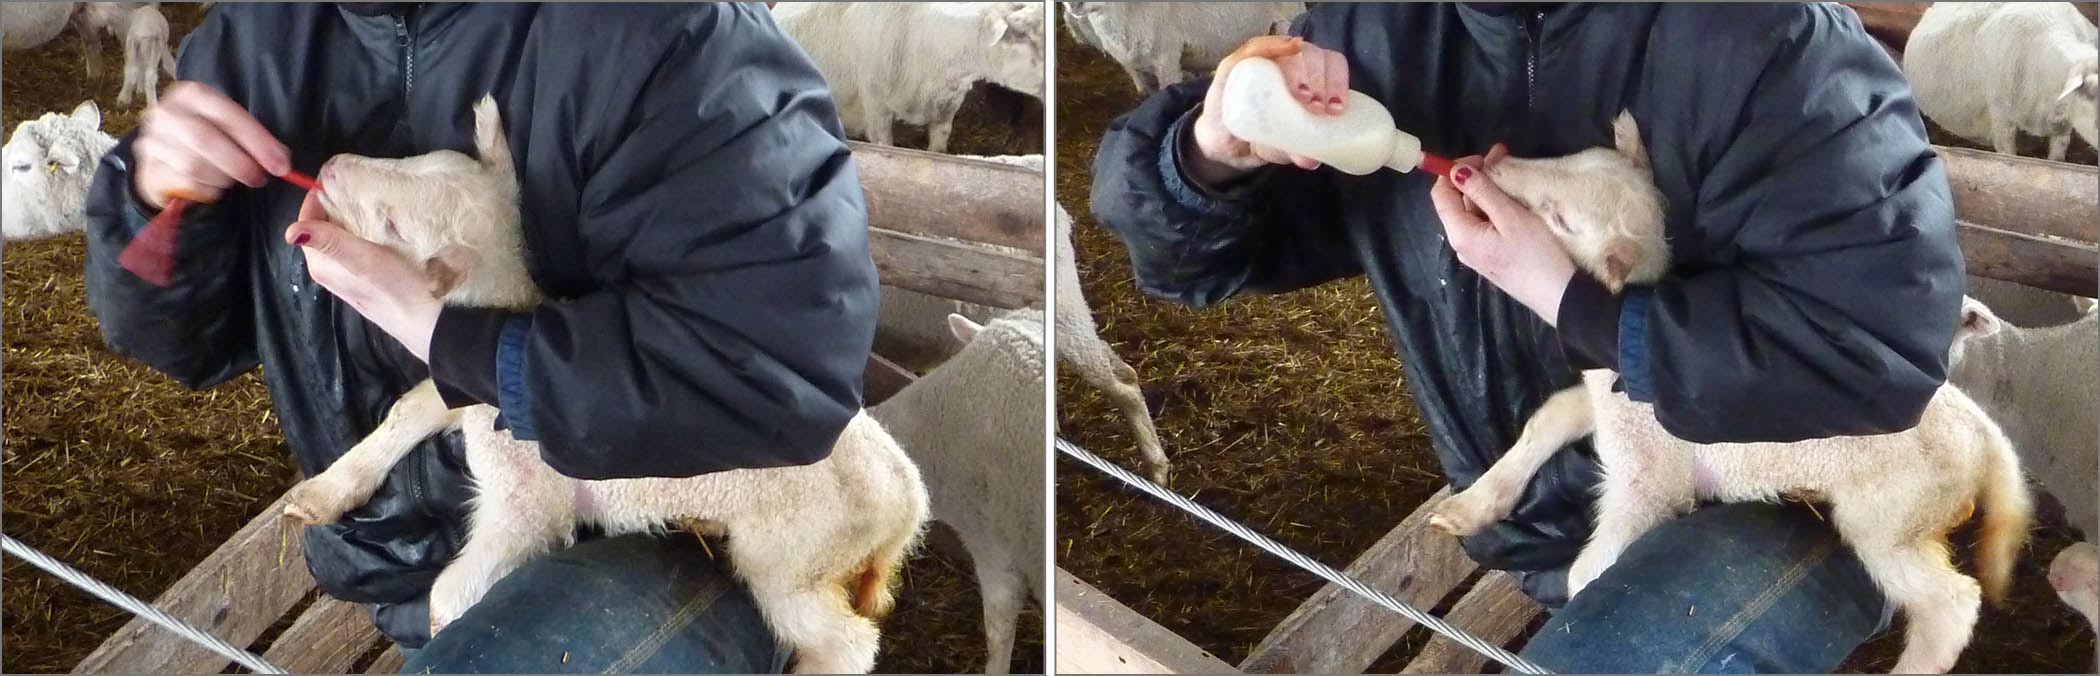 Left: Woman holding a lamb and inserting stomach tube. Right: Woman holding a lamb and administering colostrum through stomach tube.